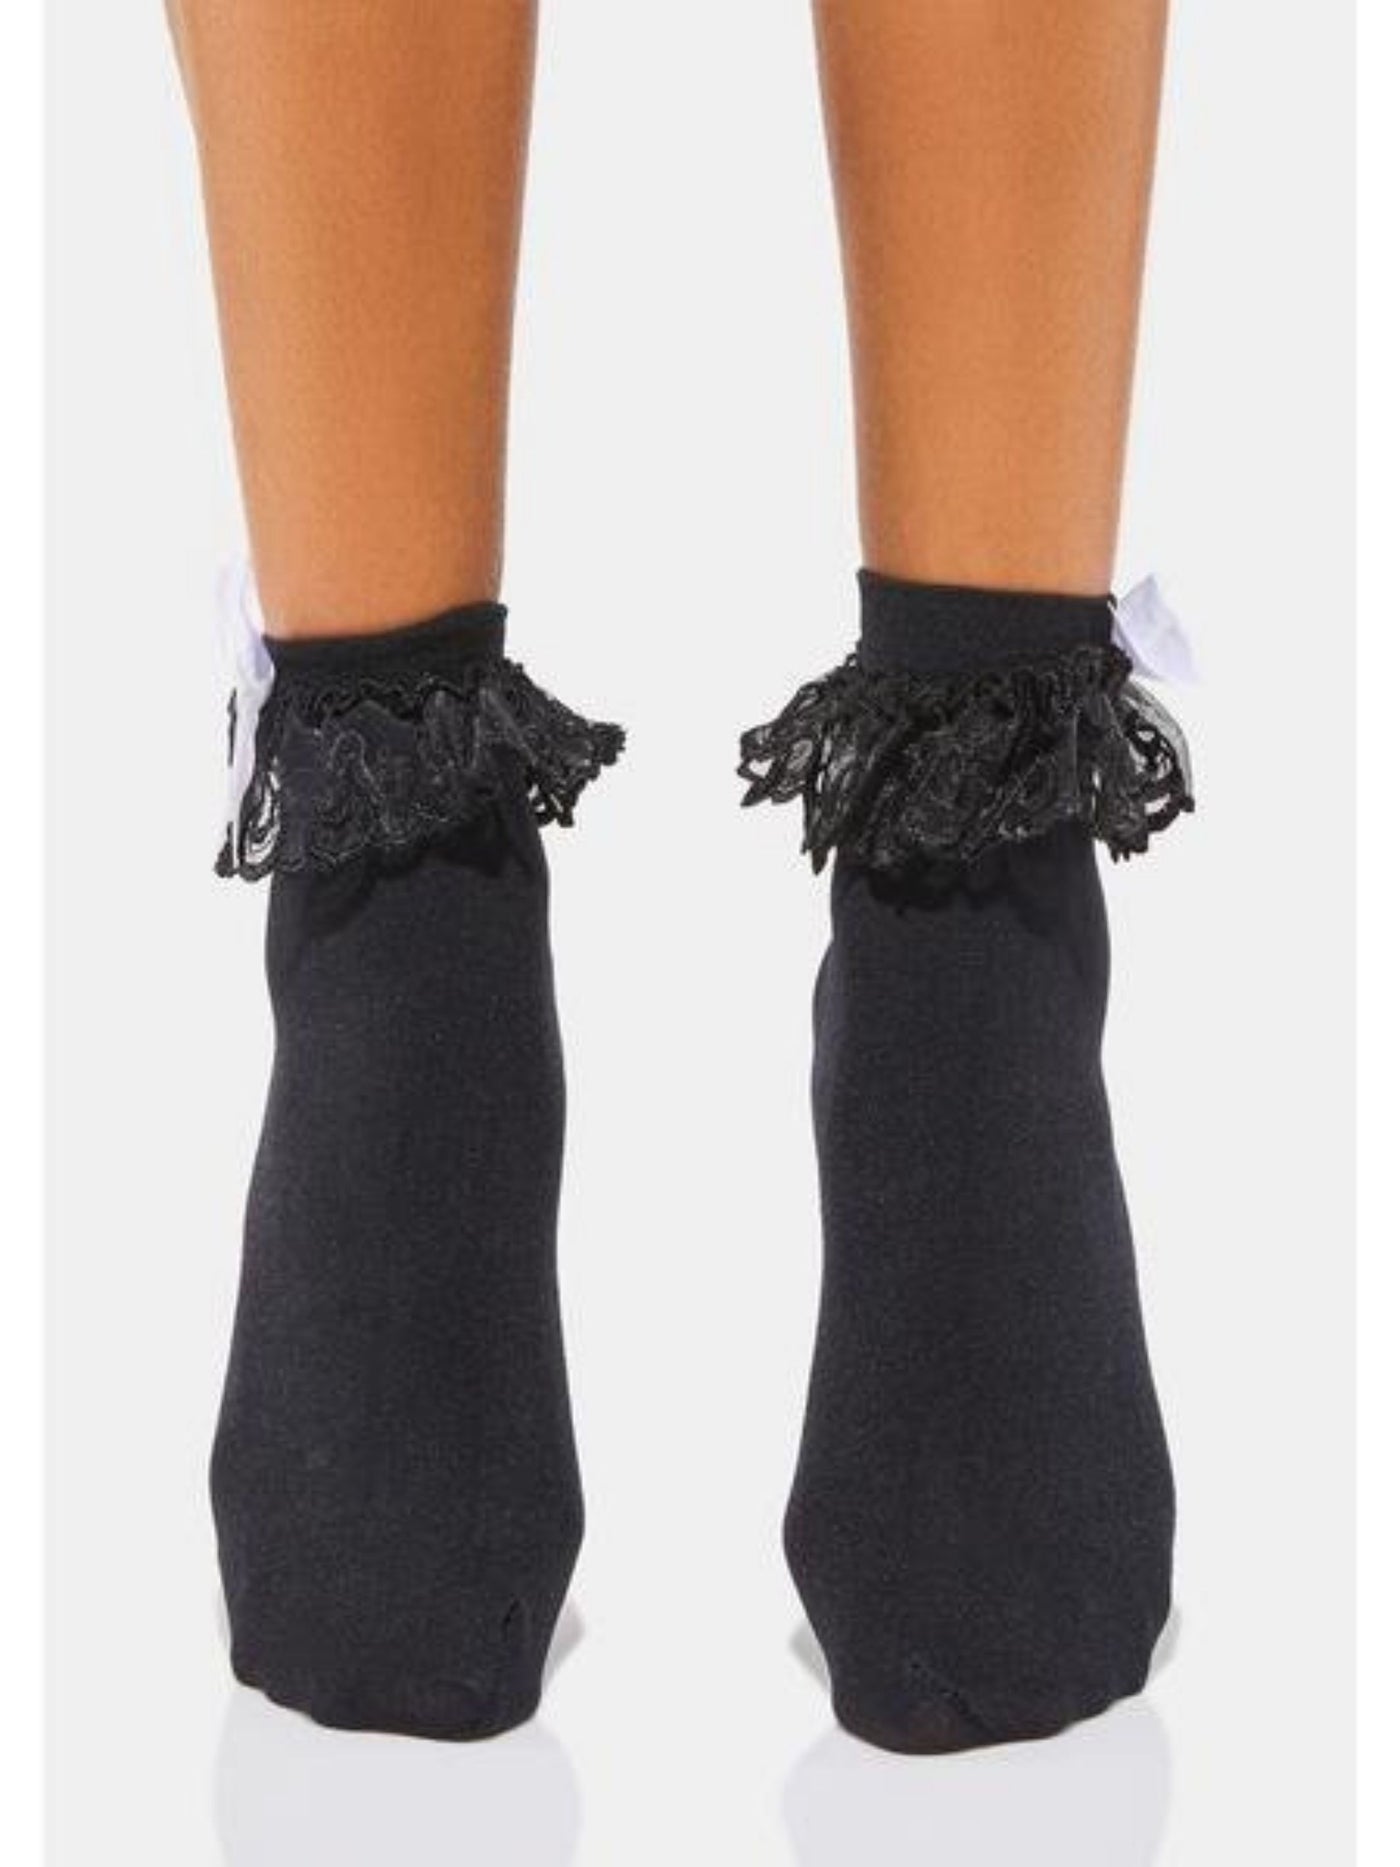 Gothic Lolita Black Ruffle Ankle Socks with White Bow